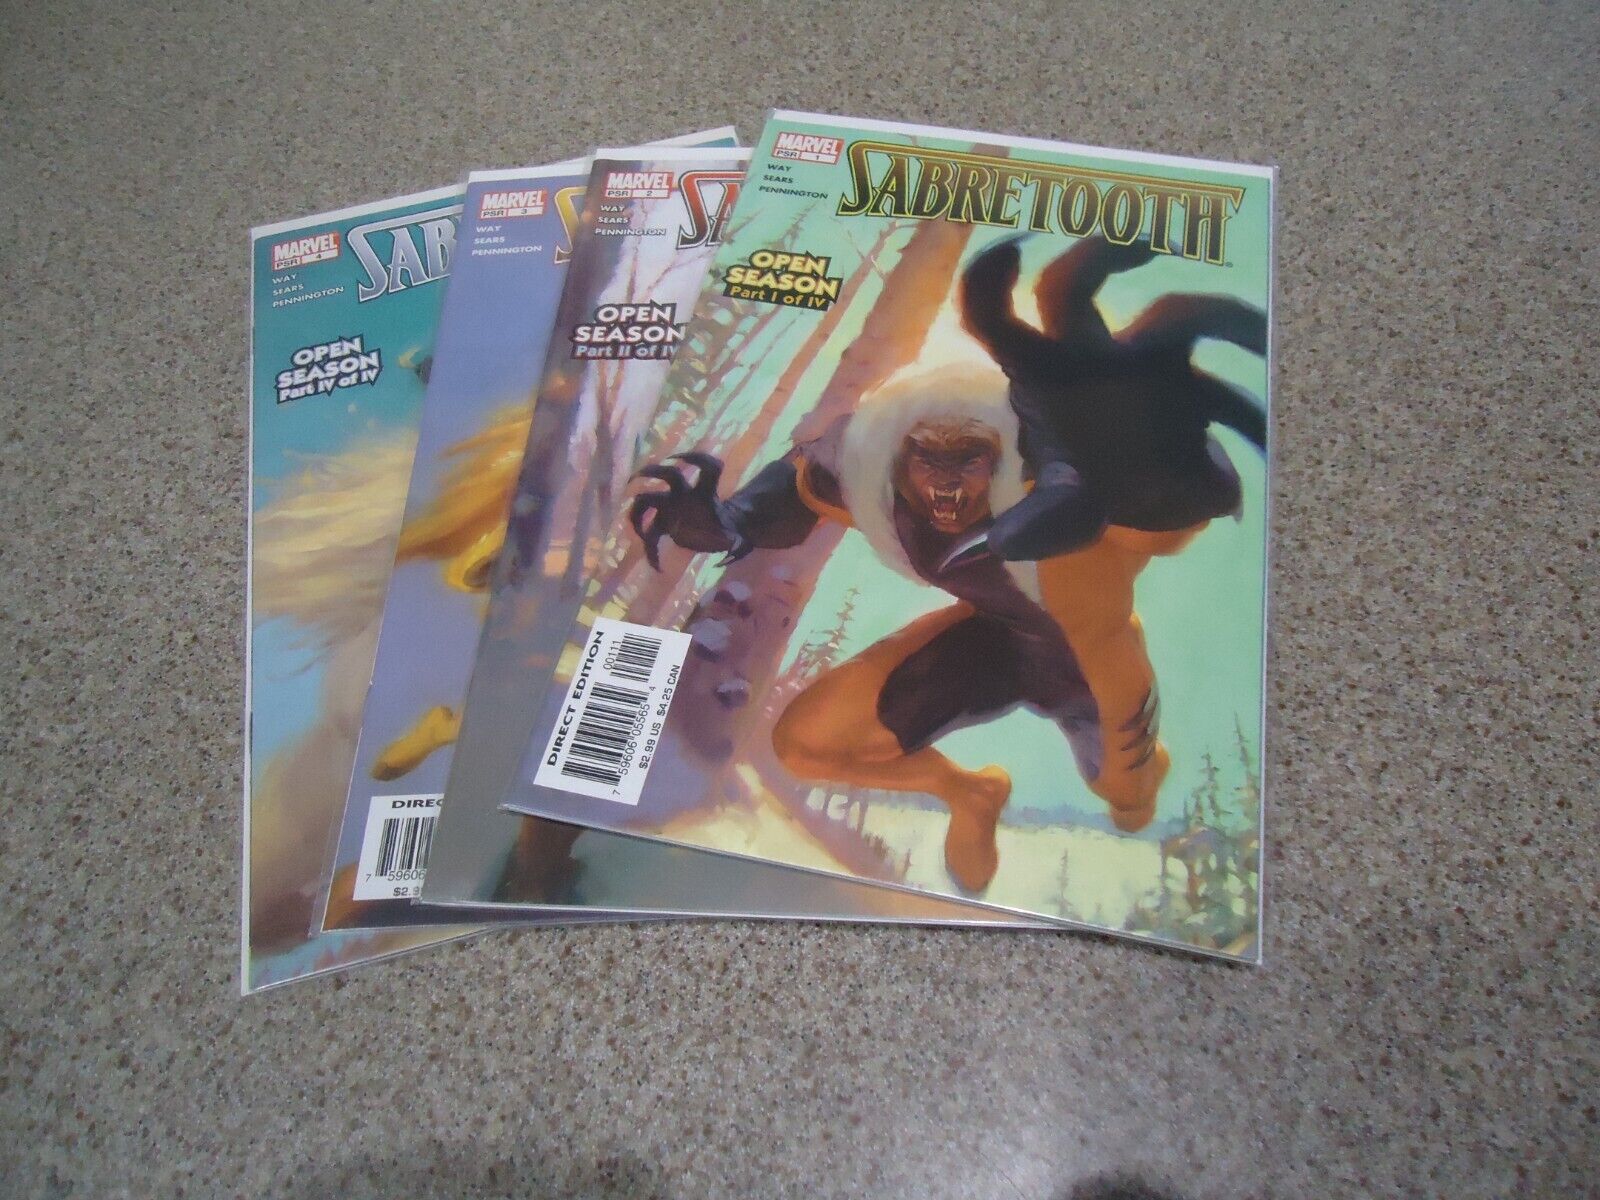 SABRETOOTH OPEN SEASON COMPLETE SERIES 1-4 + BACK TO NATURE